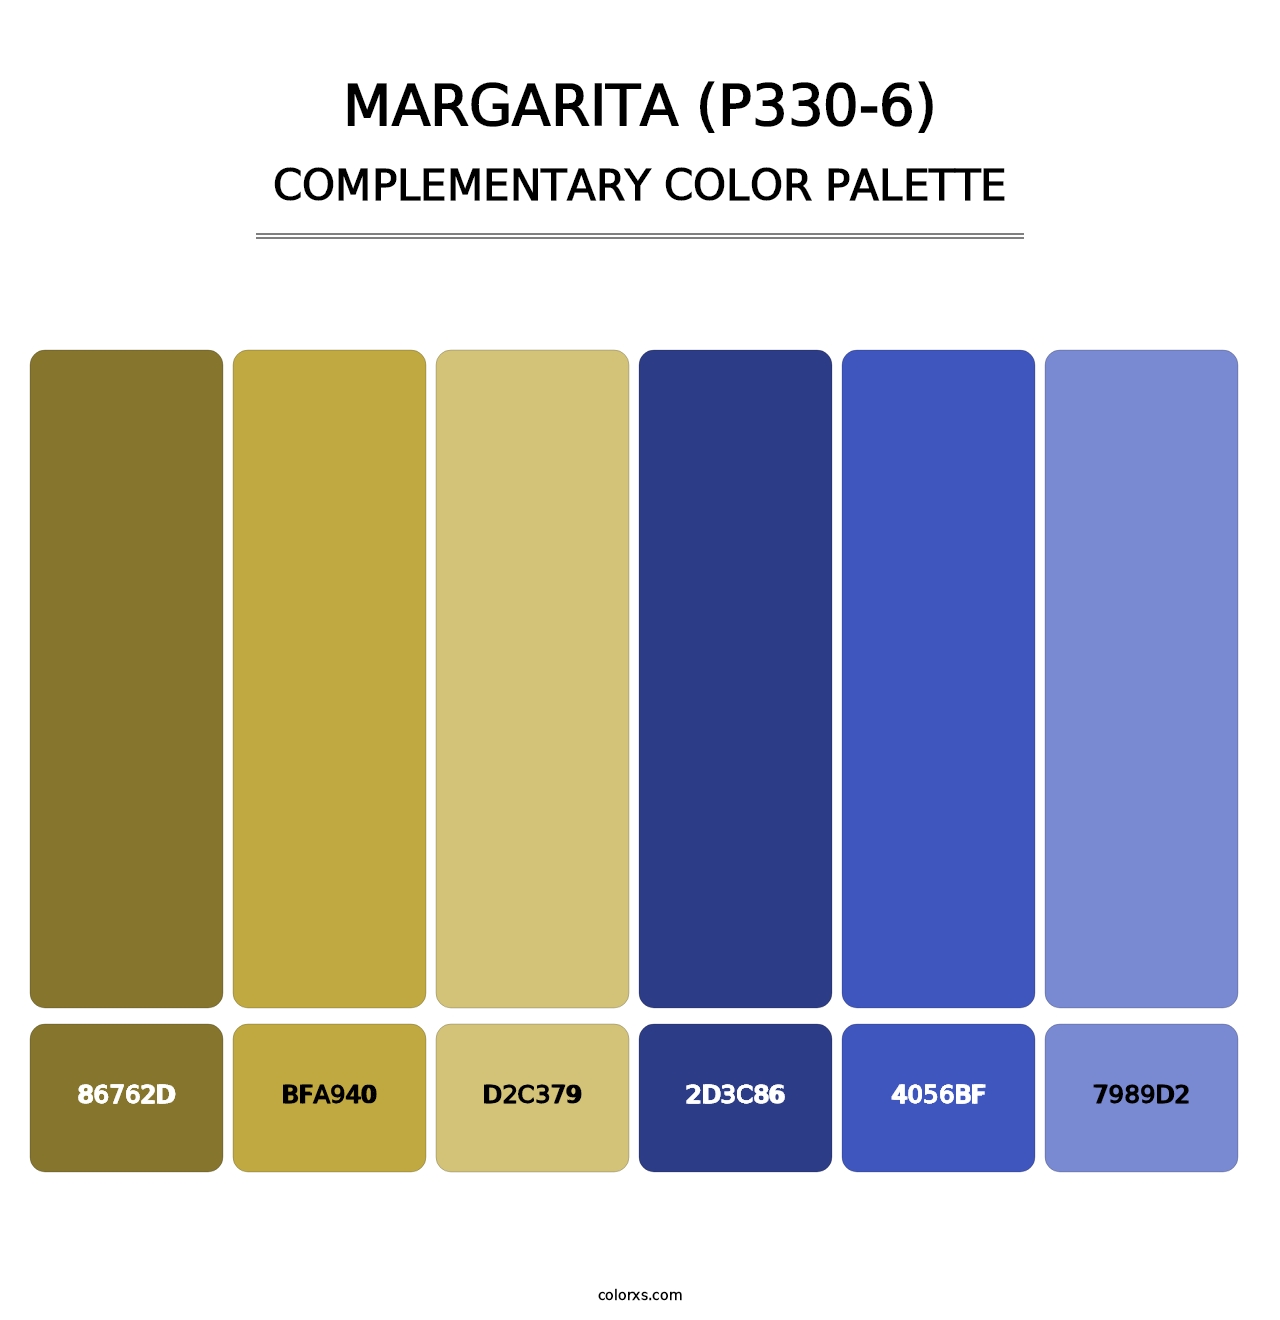 Margarita (P330-6) - Complementary Color Palette